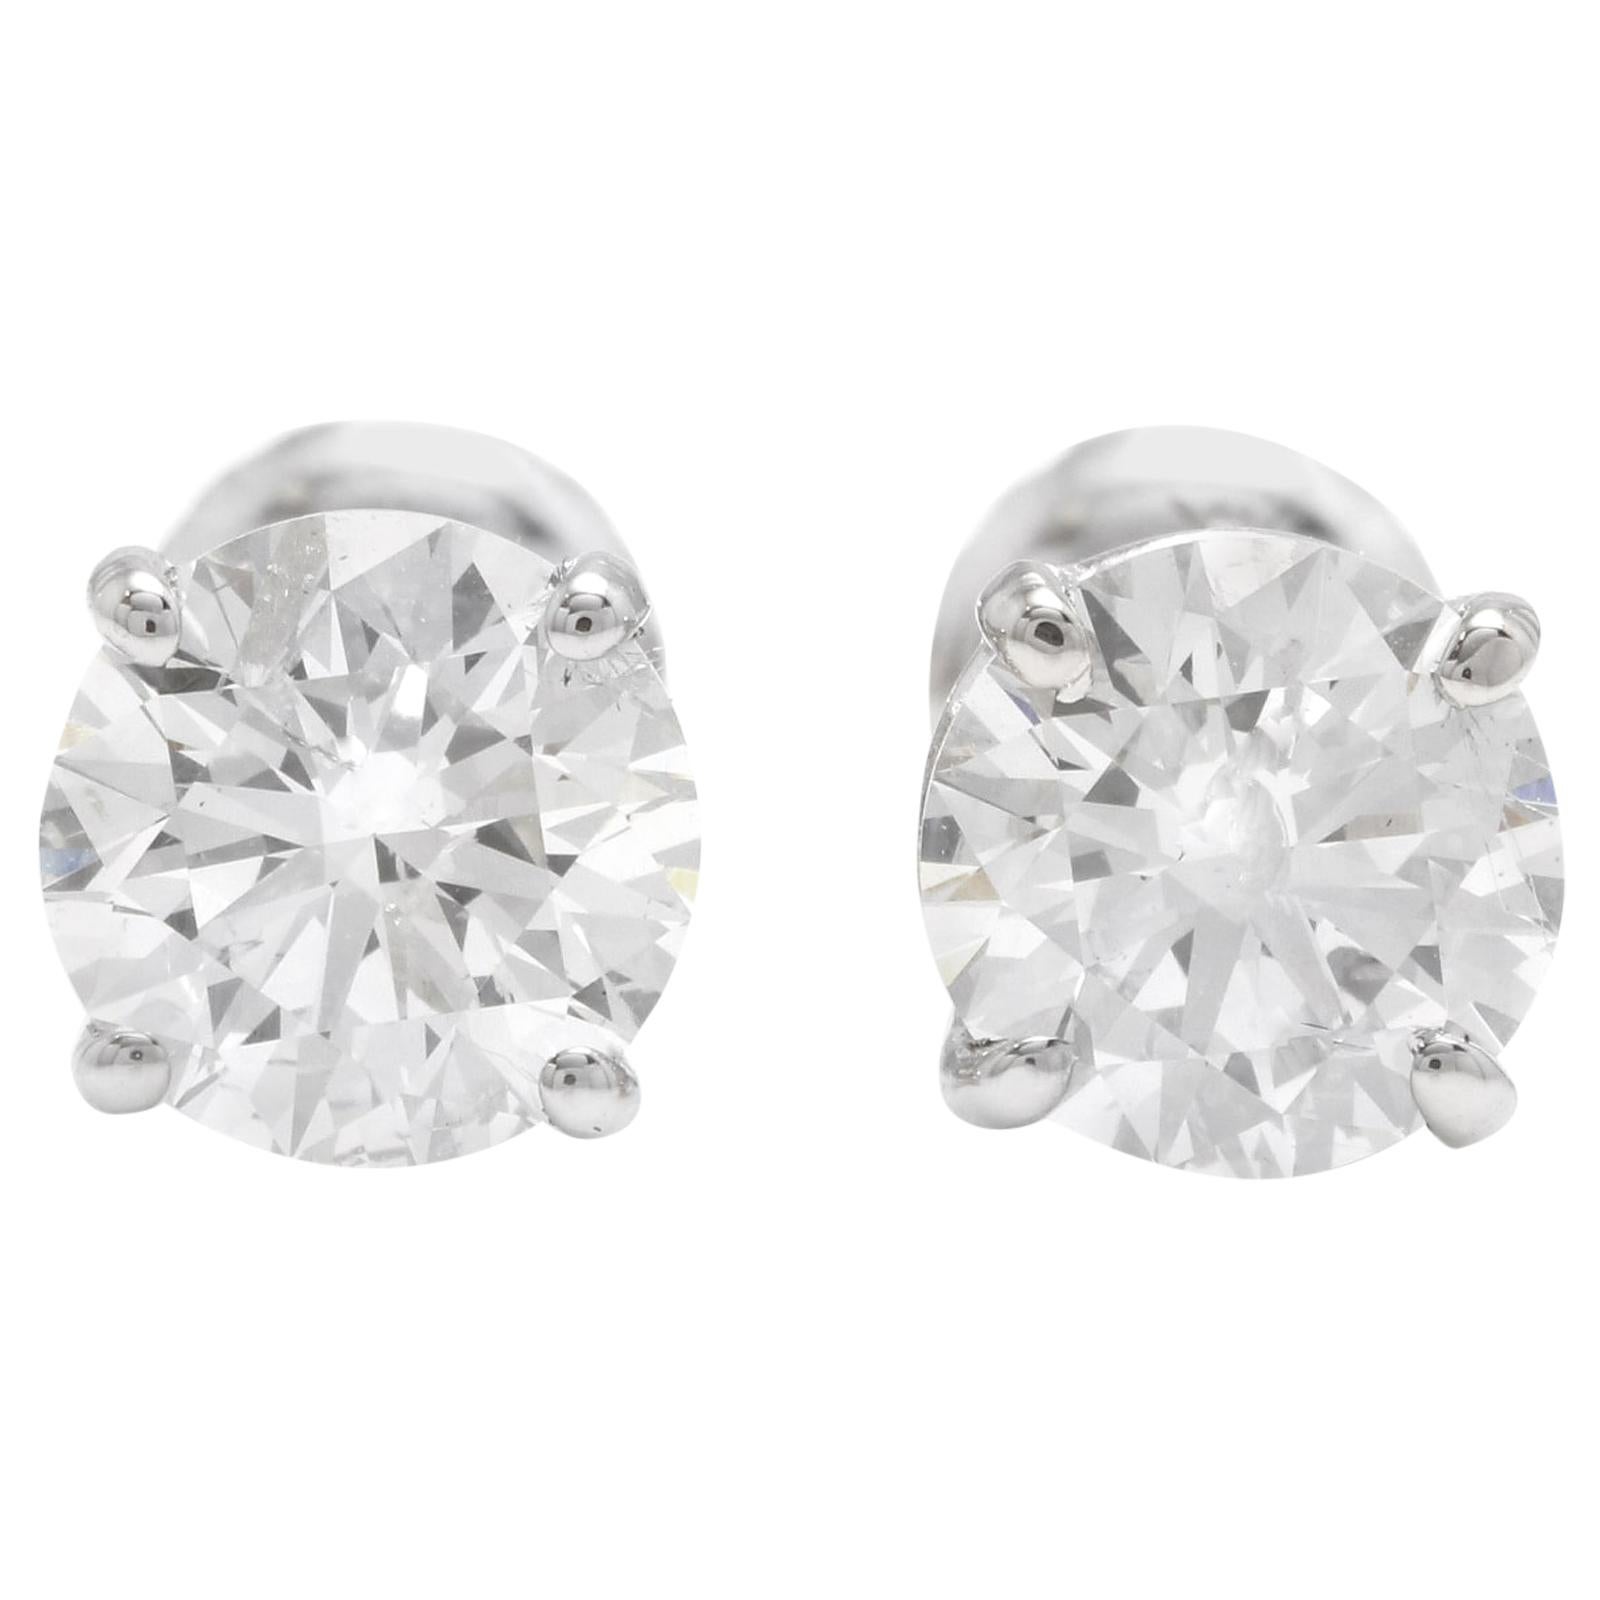 Exquisite 0.80 Carat Natural Diamond 14 Karat Solid White Gold Stud Earrings For Sale